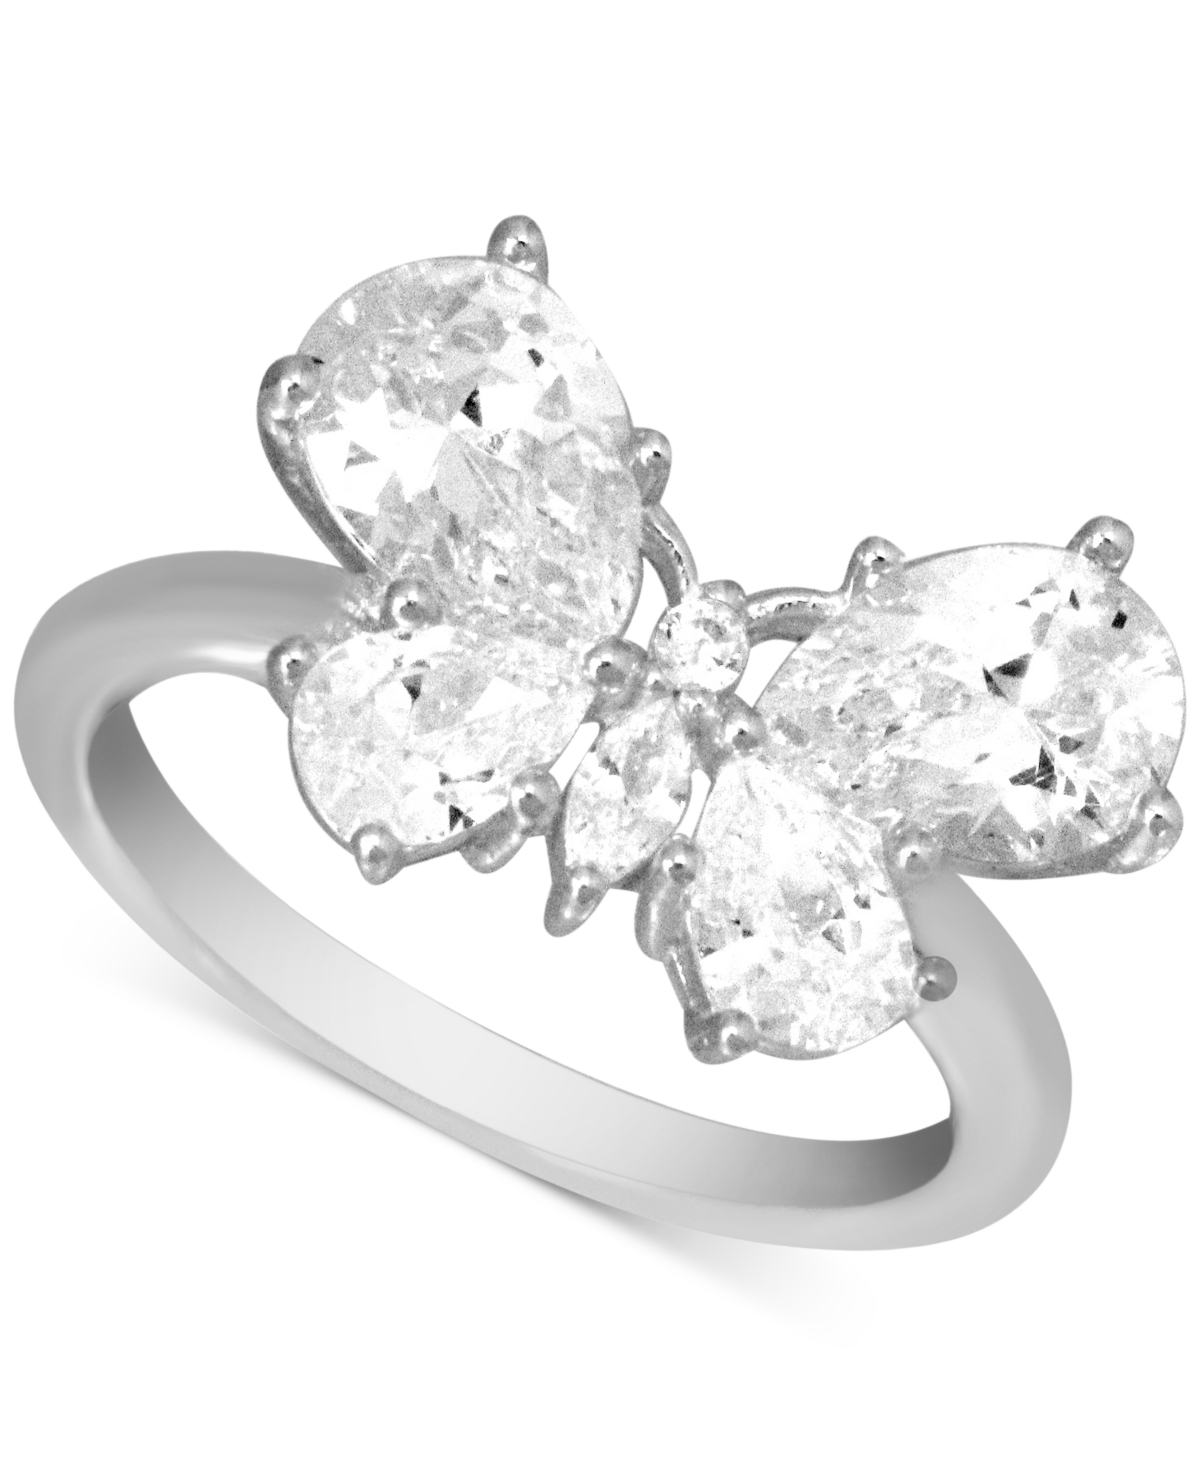 Cubic Zirconia Butterfly Statement Ring in Silver-Plate